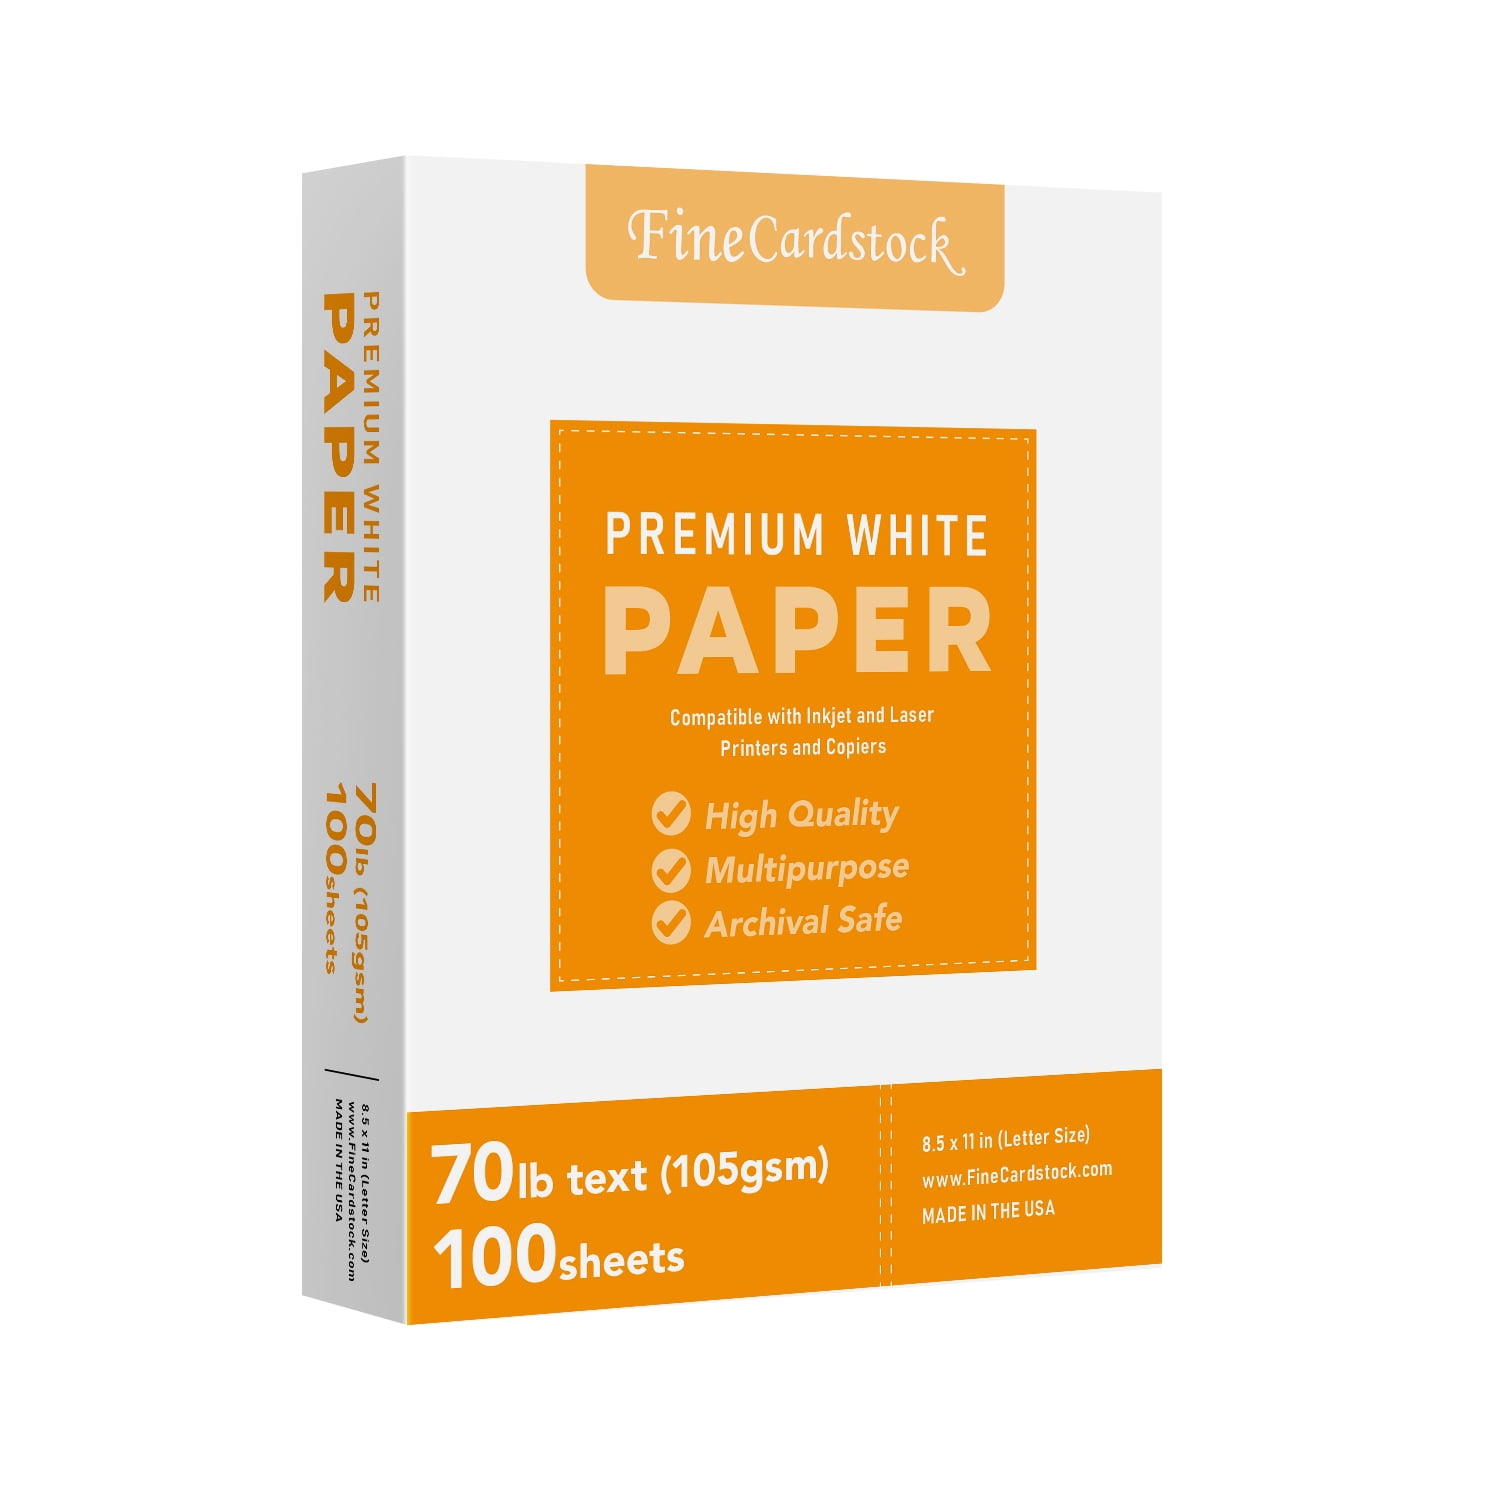 Premium A4 Paper: Unmatched Quality and Versatility for Your